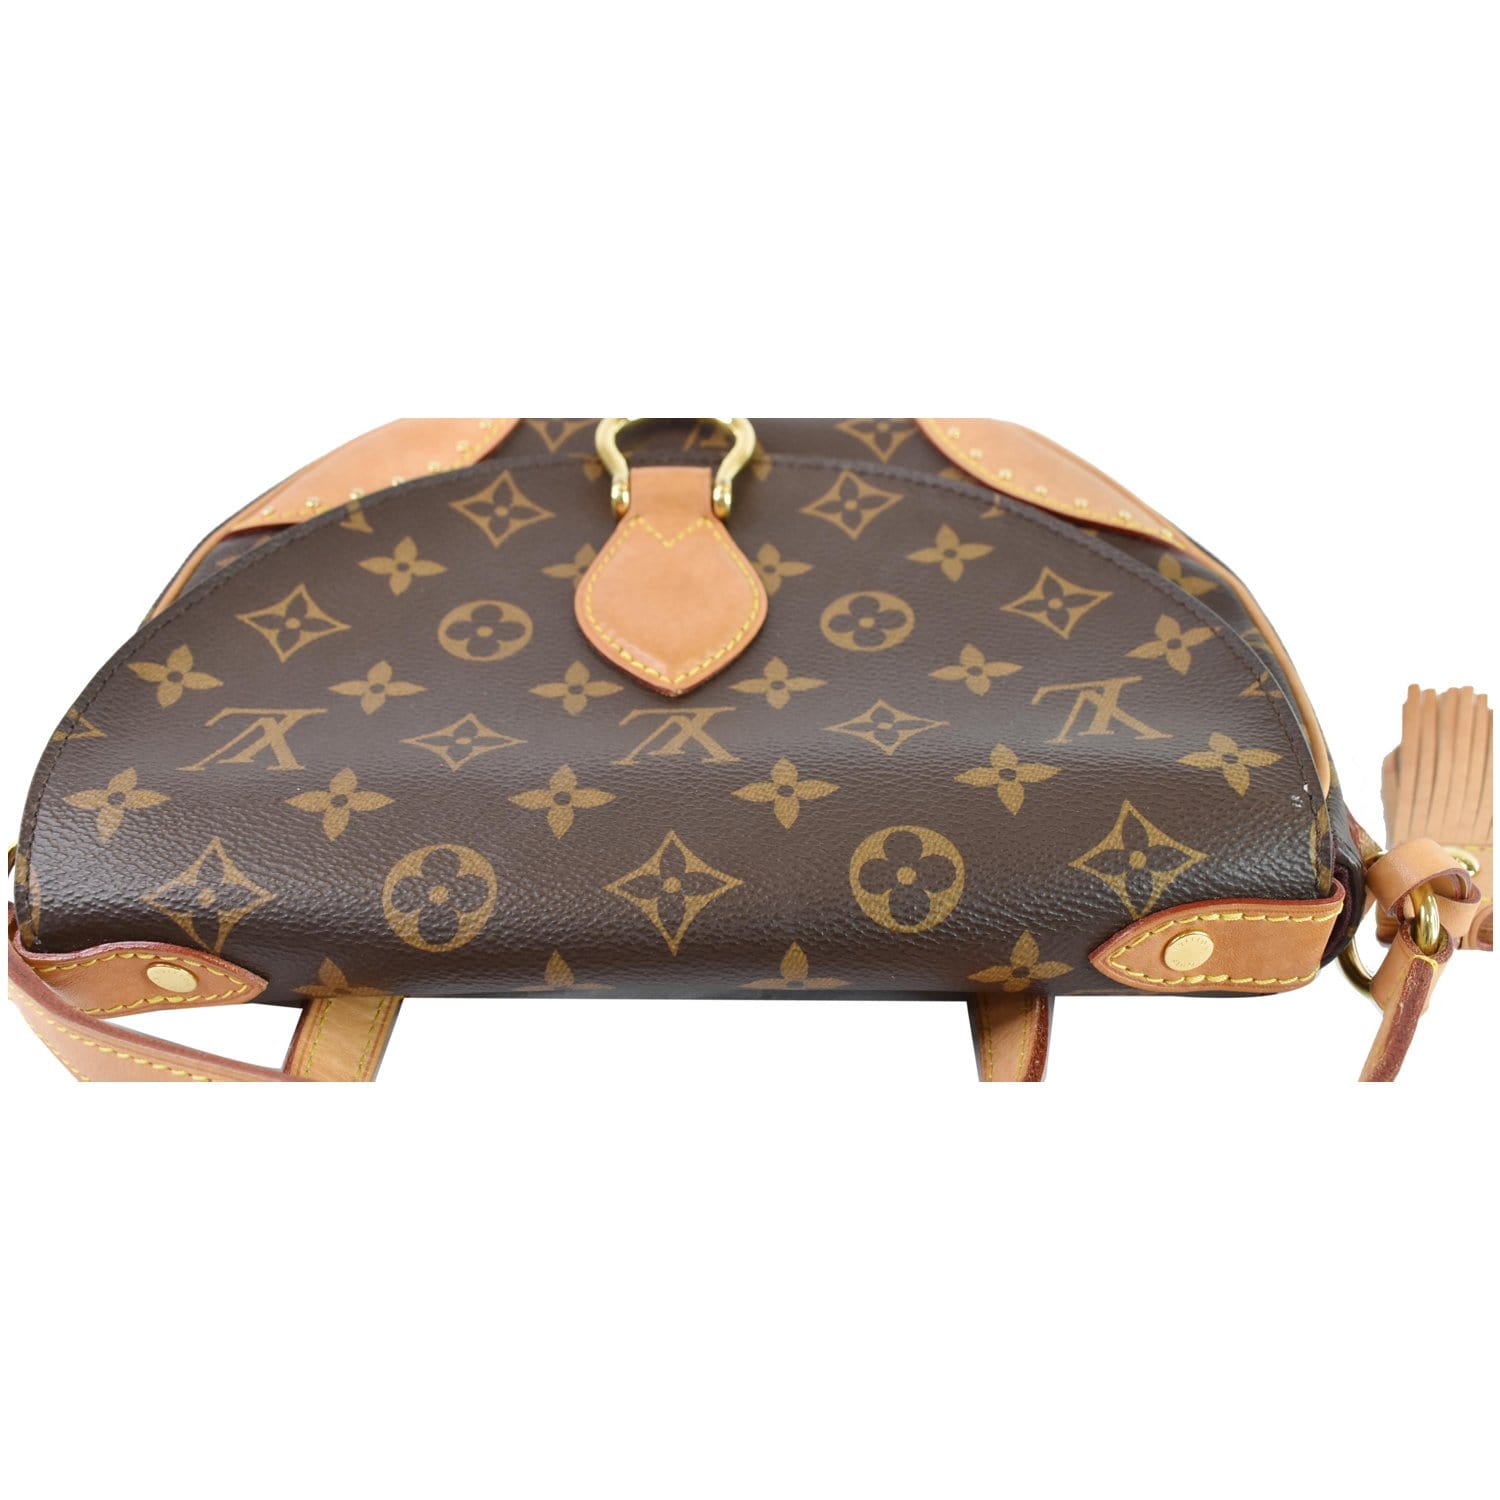 Shop for Louis Vuitton Monogram Canvas Leather St. Cloud PM Crossbody Bag -  Shipped from USA